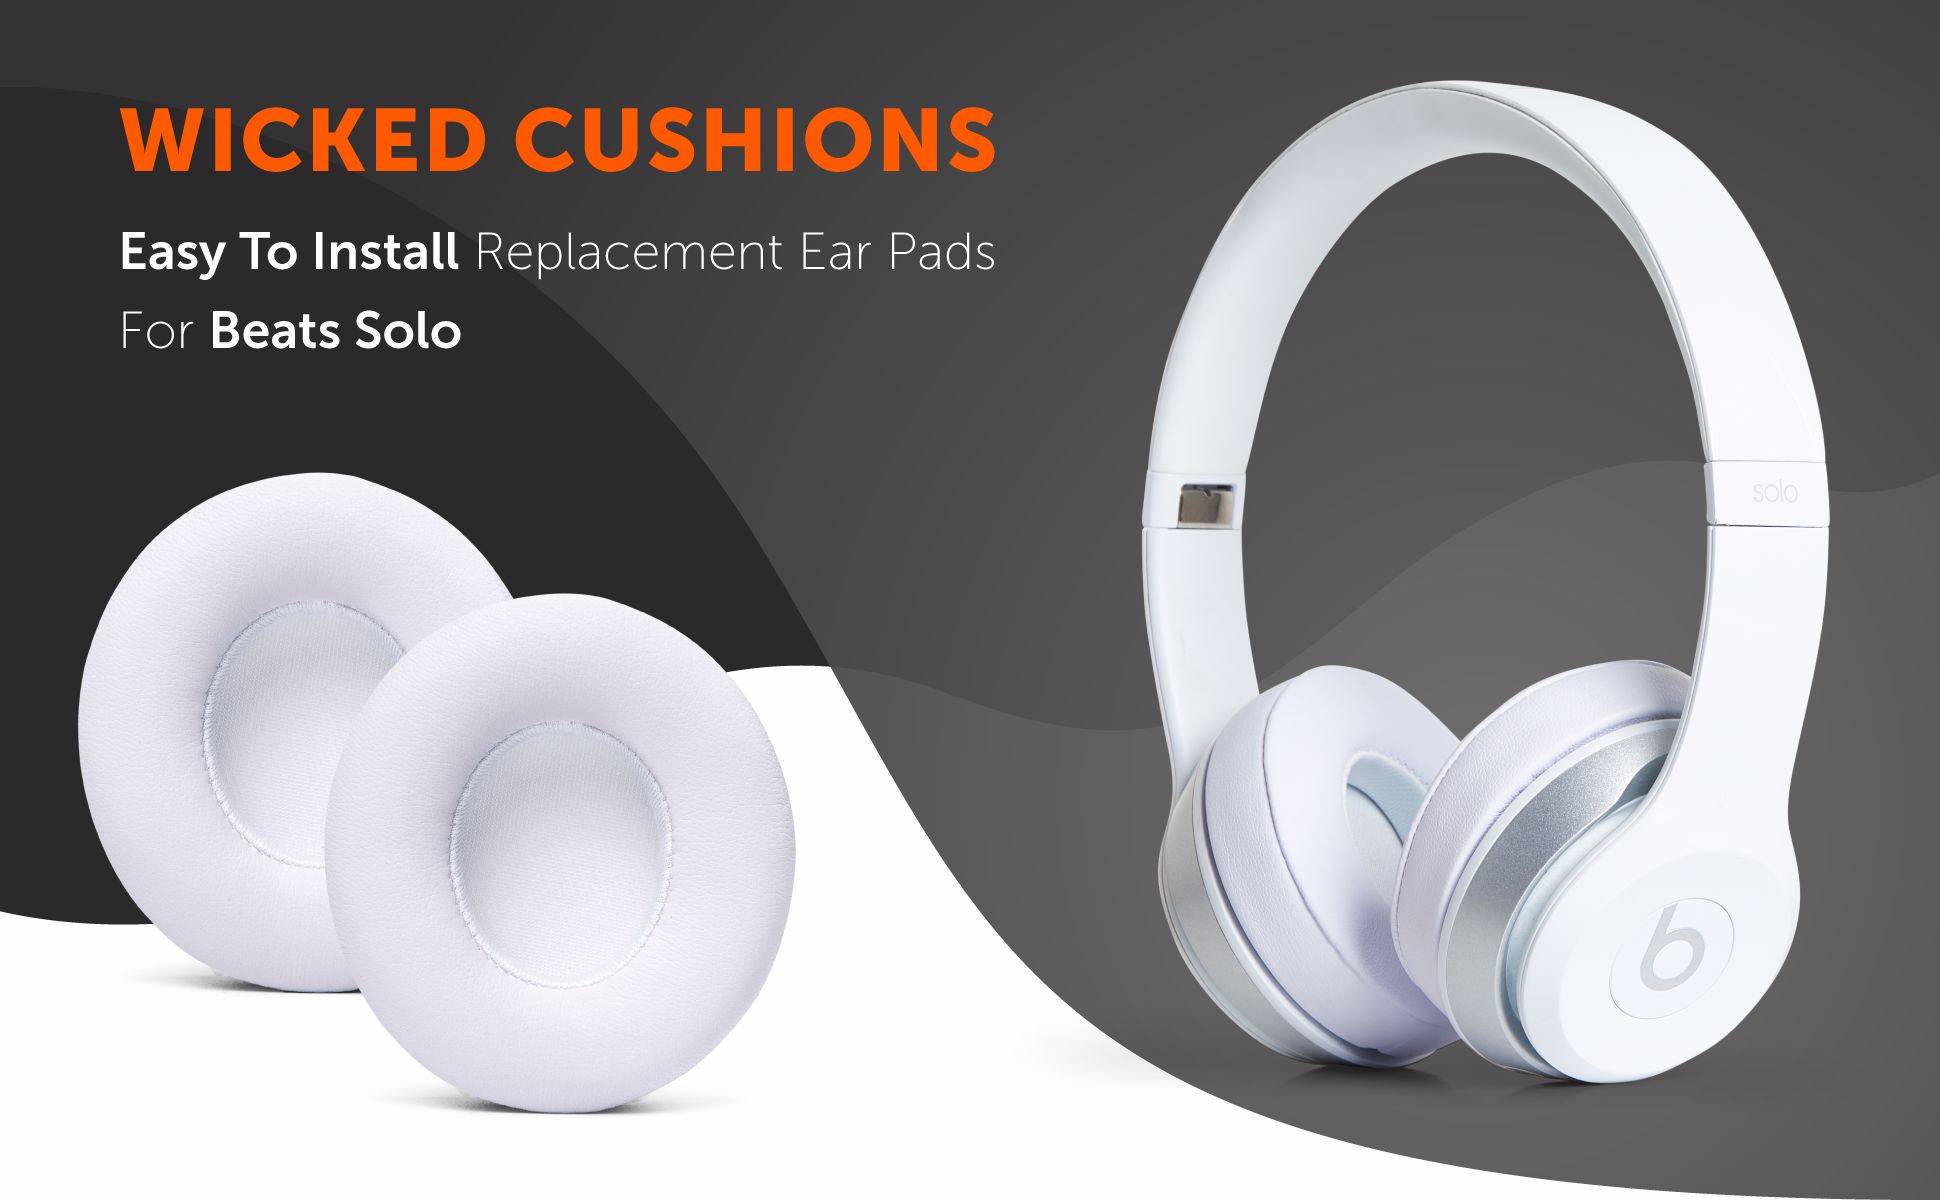 Beats Solo Replacement Ear Pads By Wicked Cushions